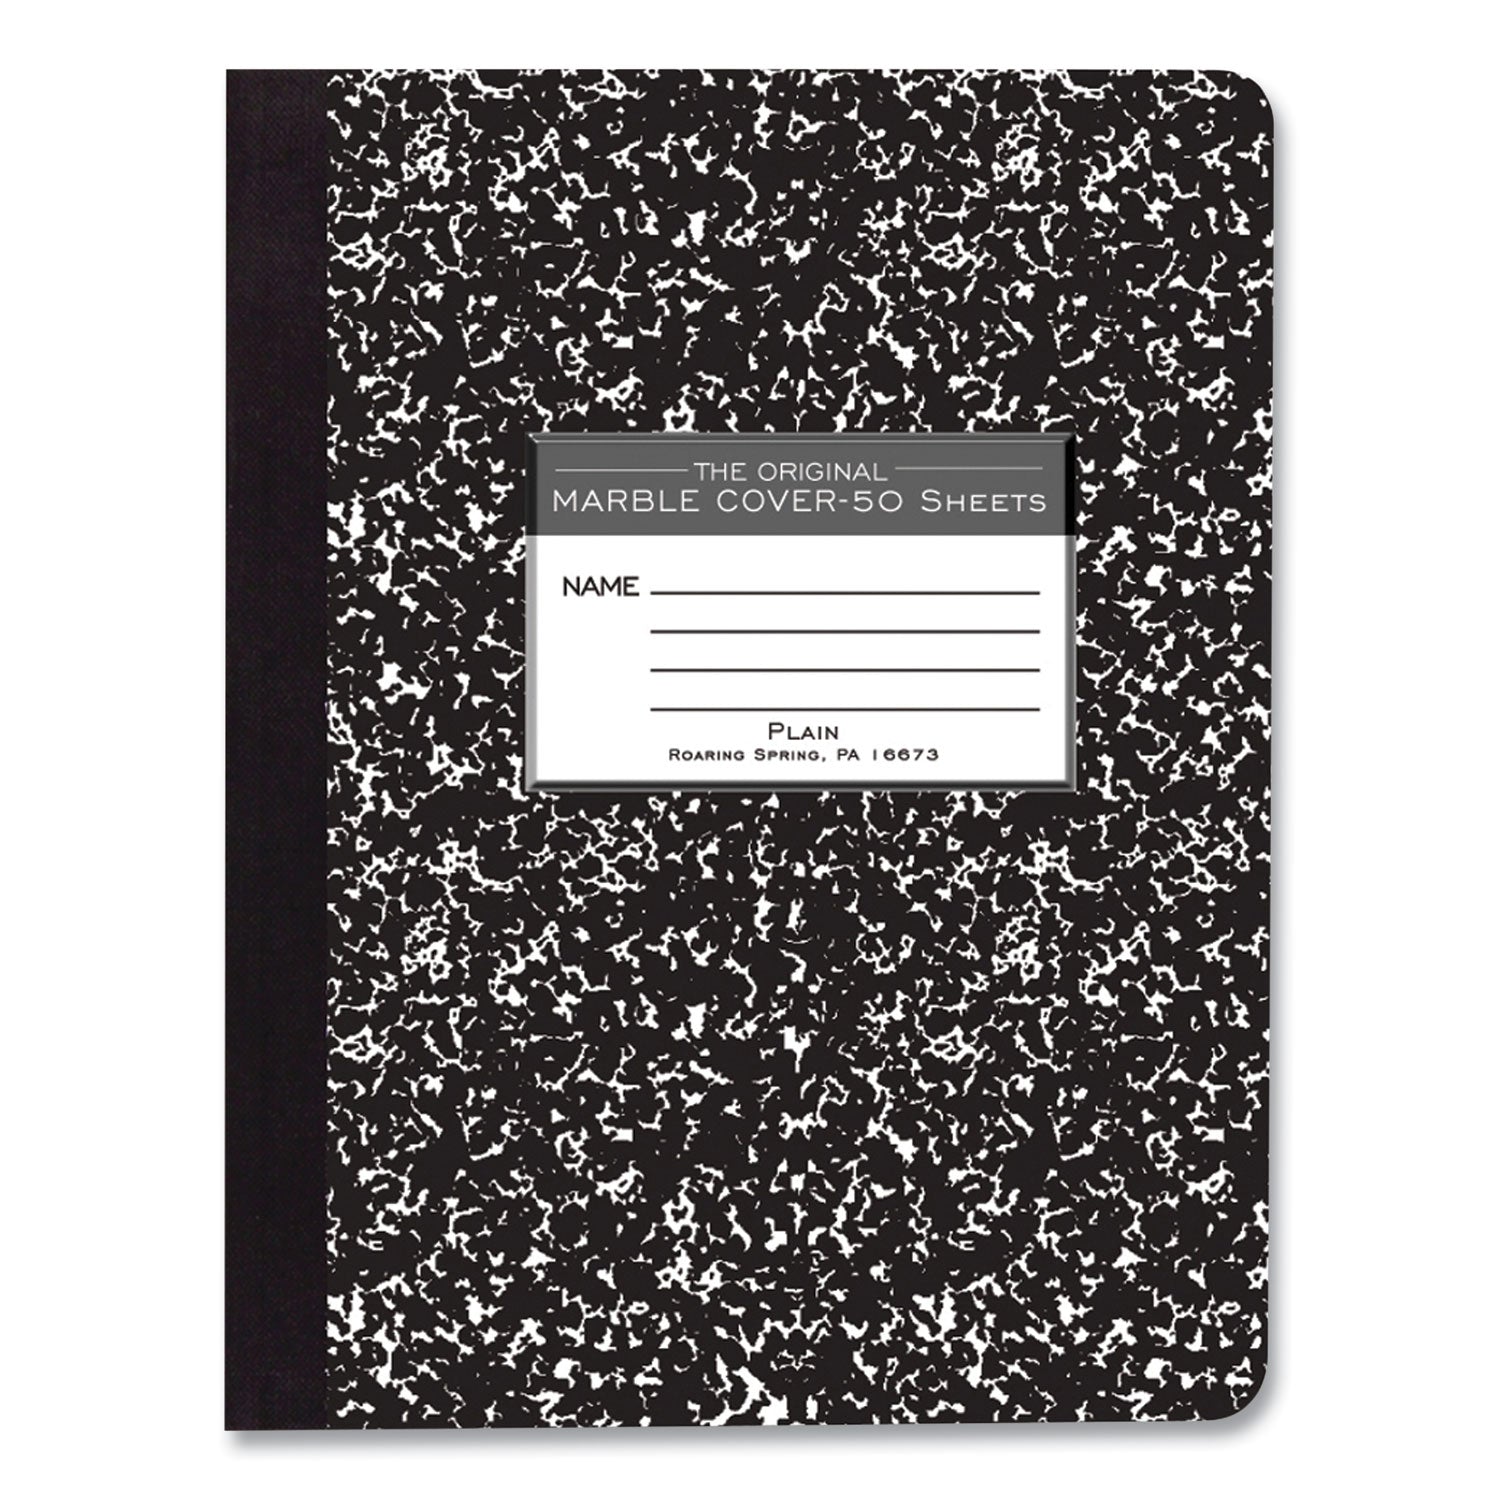 hardcover-marble-composition-book-unruled-black-marble-cover-50-975-x-75-sheets-48-carton-ships-in-4-6-business-days_roa77260cs - 2